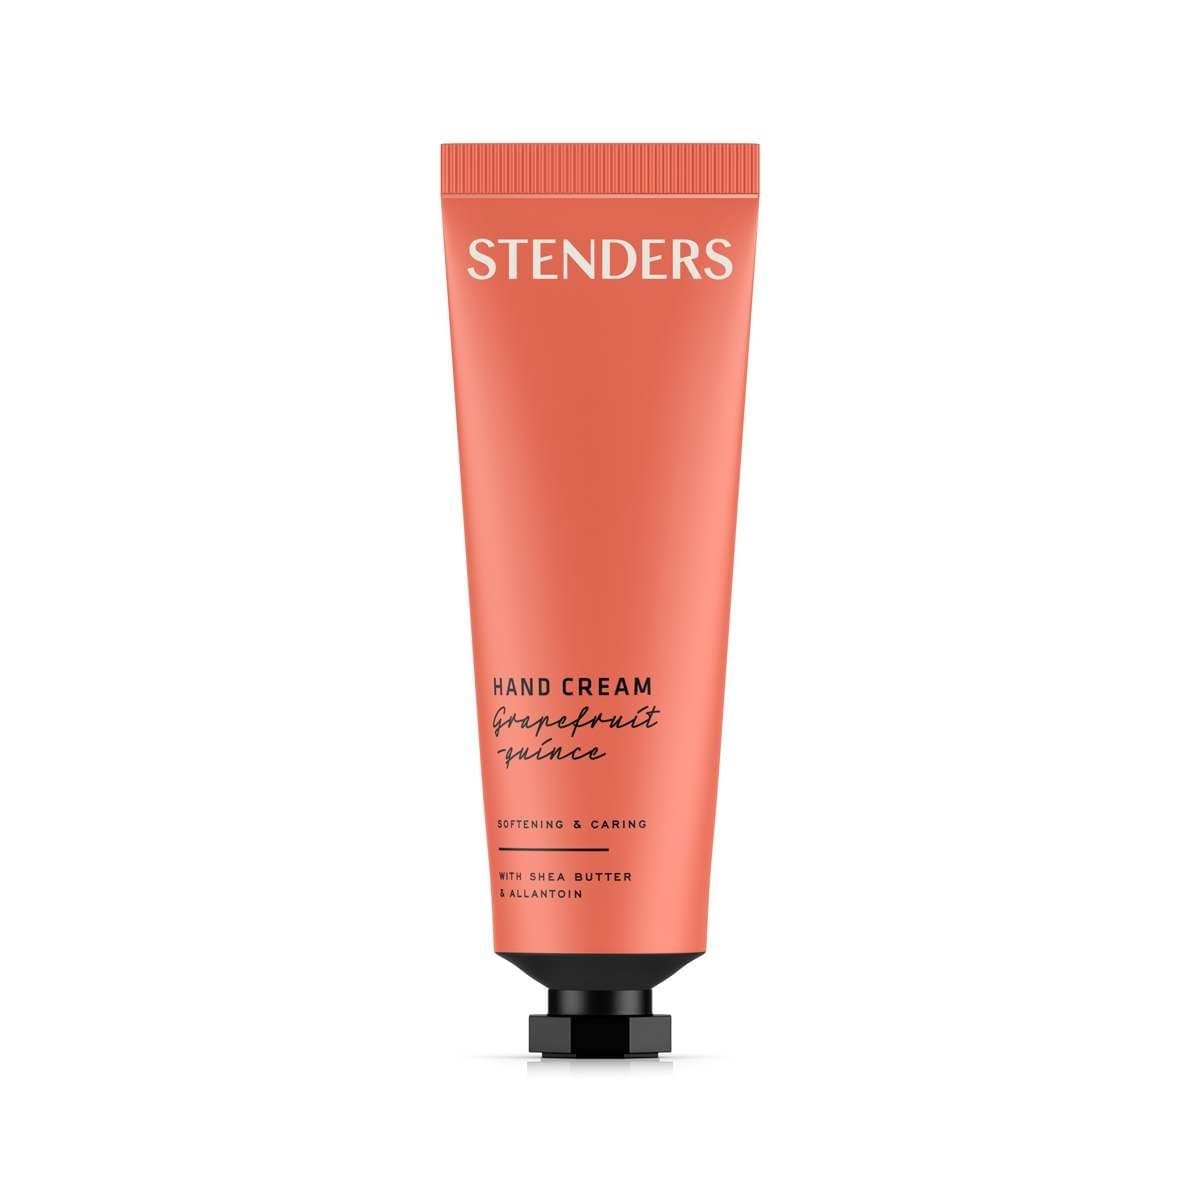 STENDERS Grapfruit Quince Softening & Caring